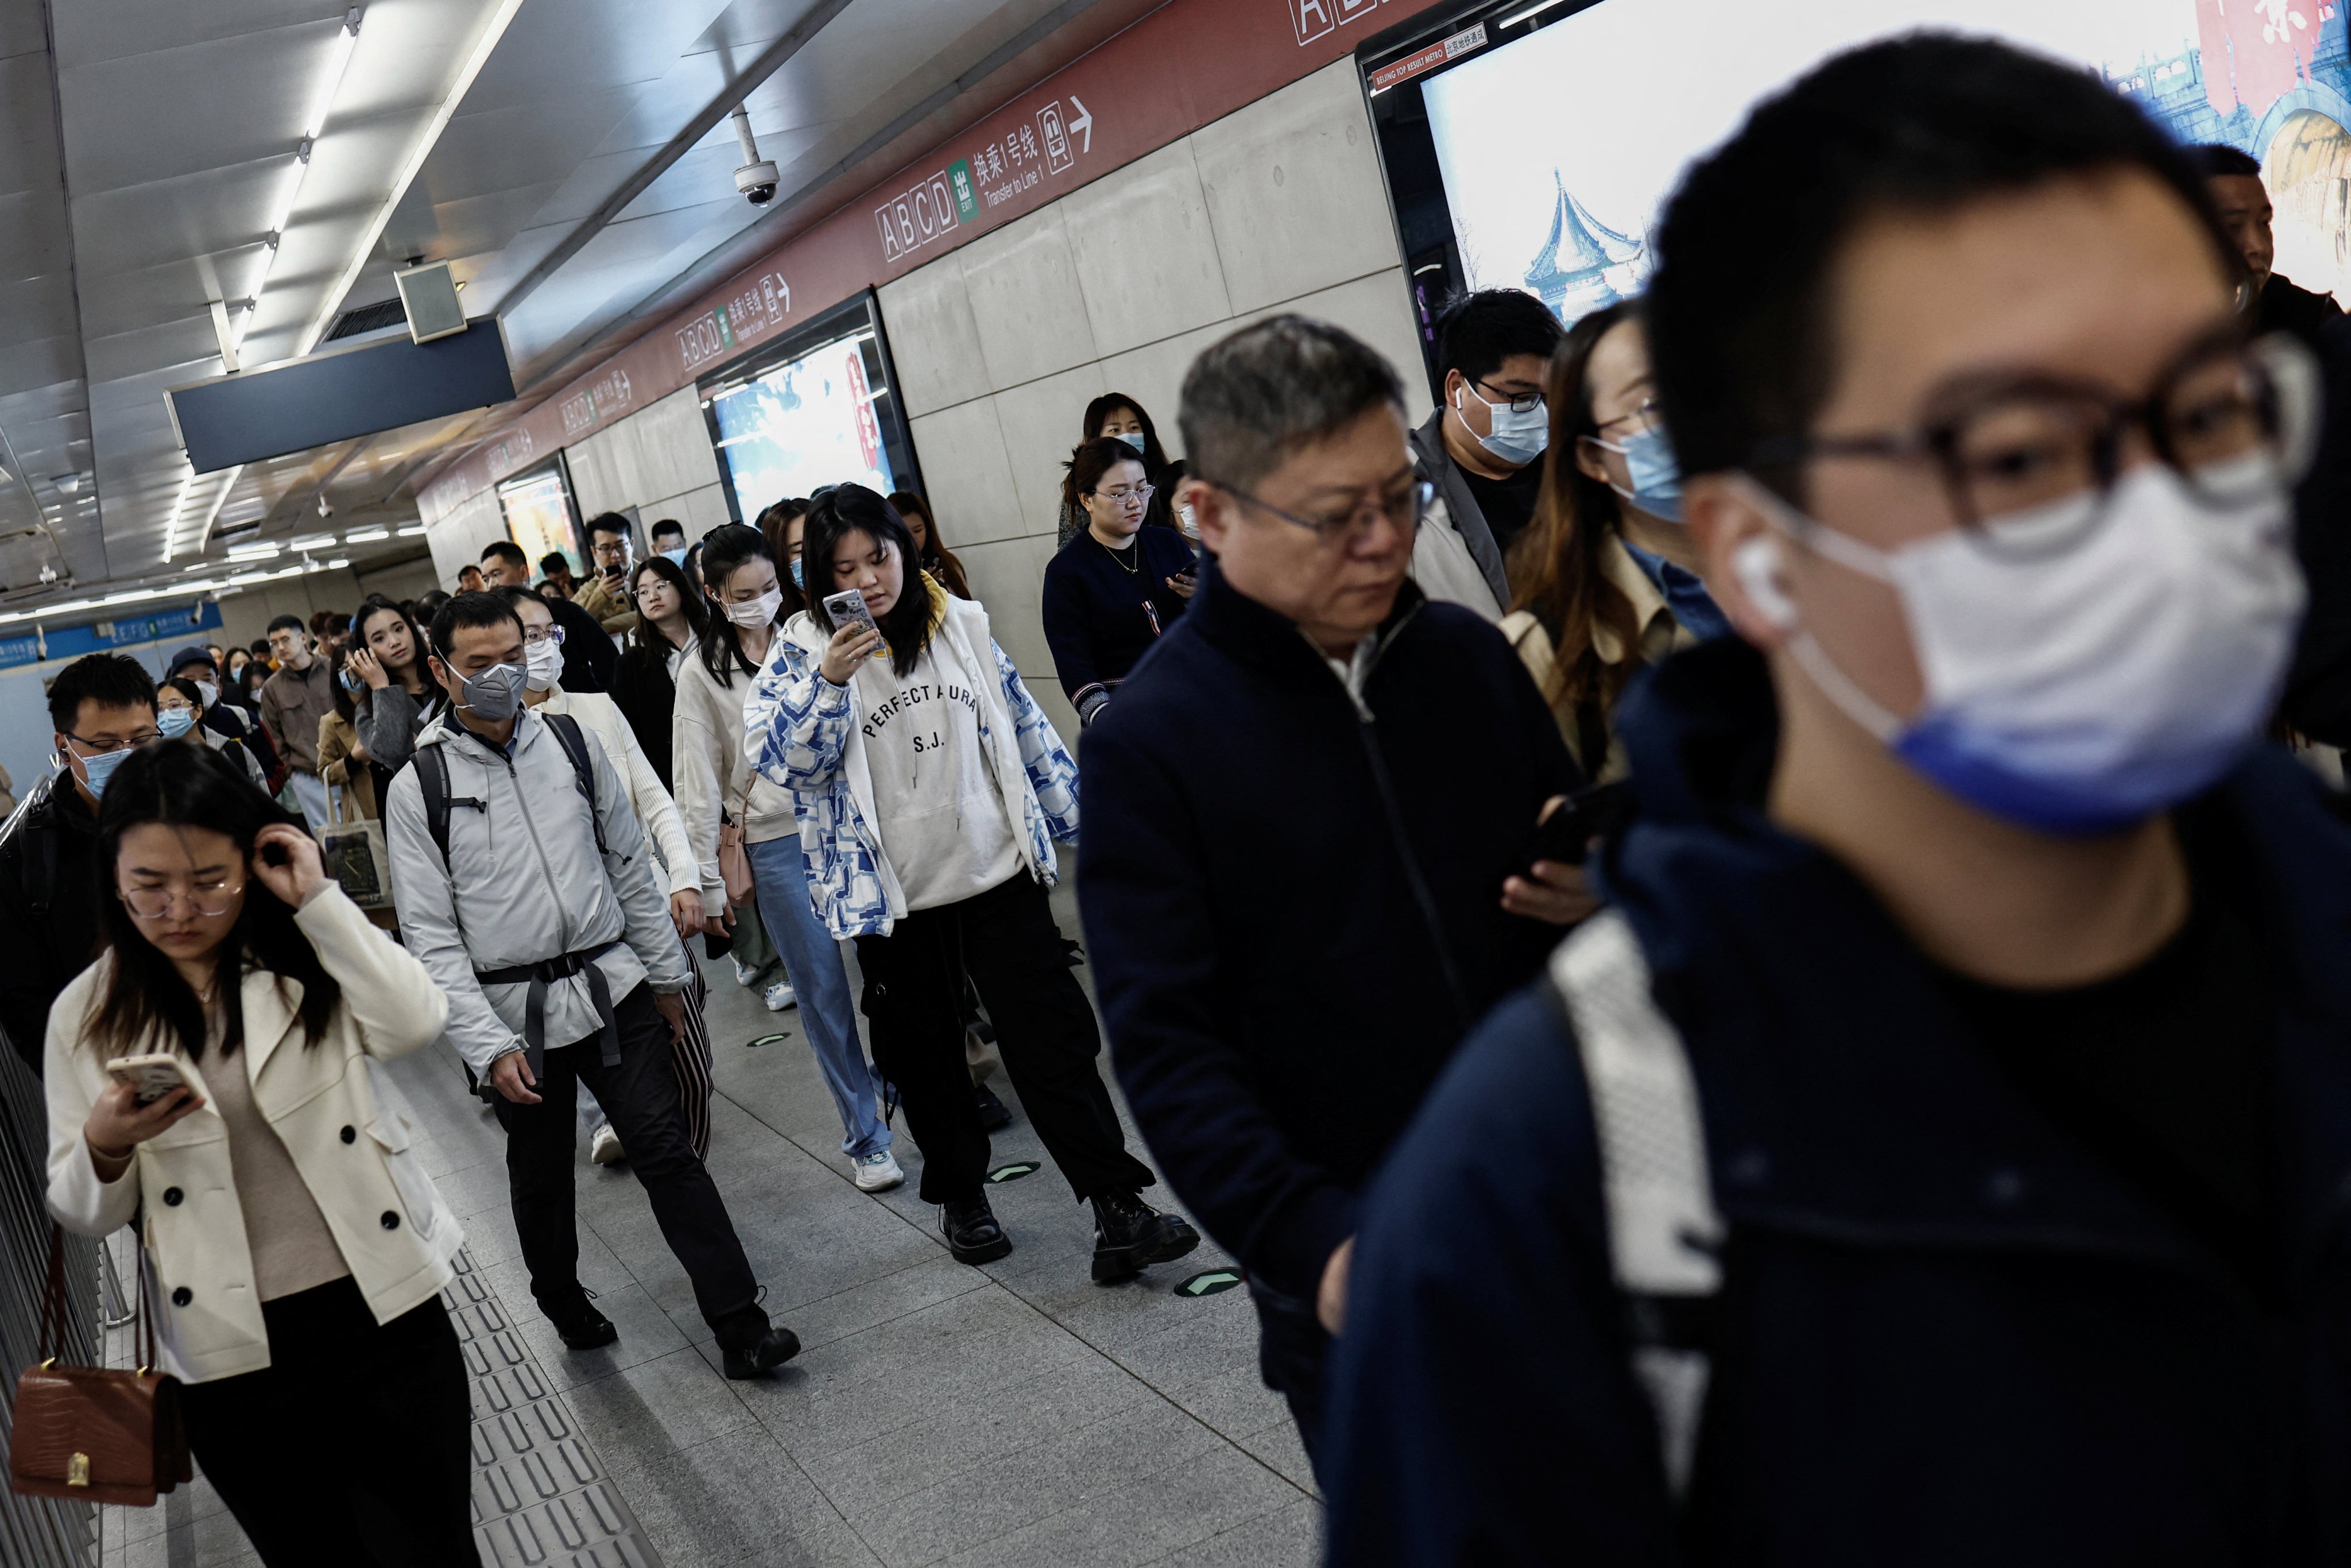 Beijing’s subway operator says the real-name system for boarding is in line with existing rail transit safety regulations in the capital. Photo: Reuters